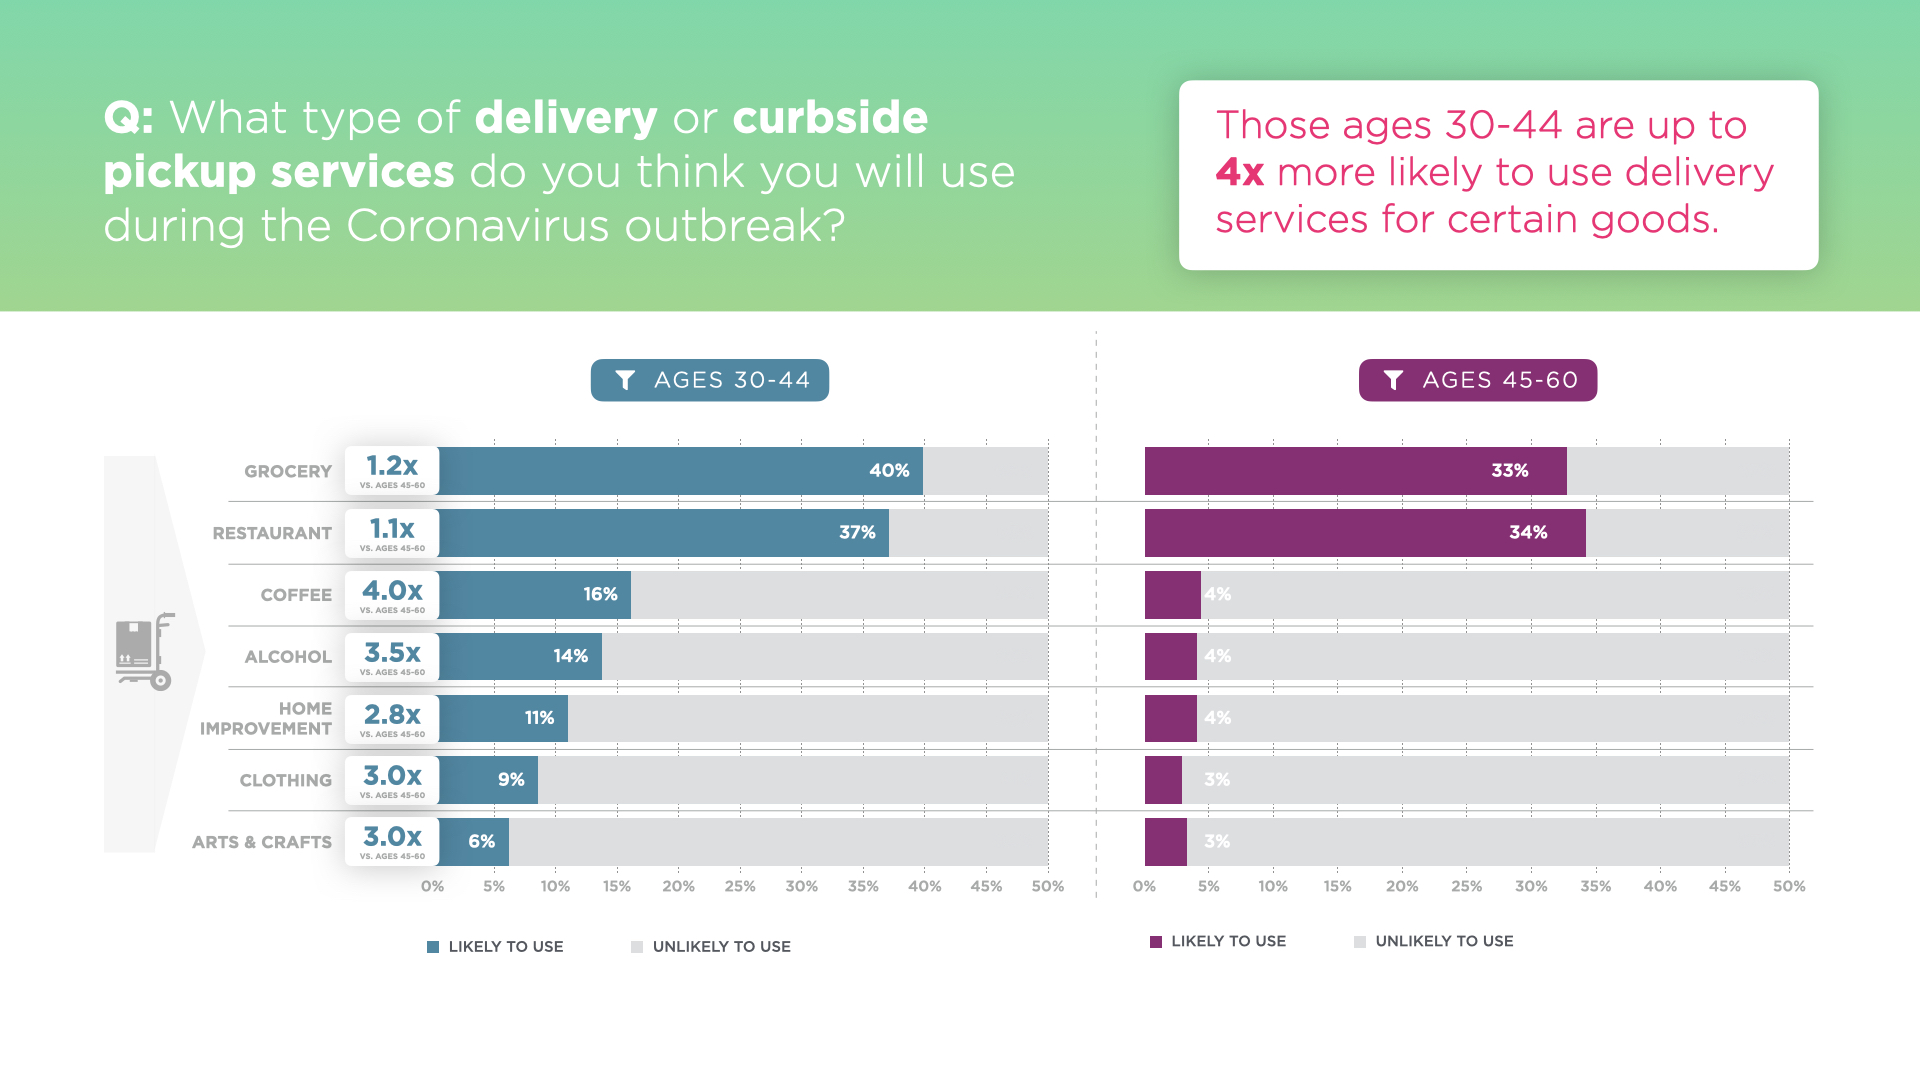 Coronavirus Impacts on Delivery Services